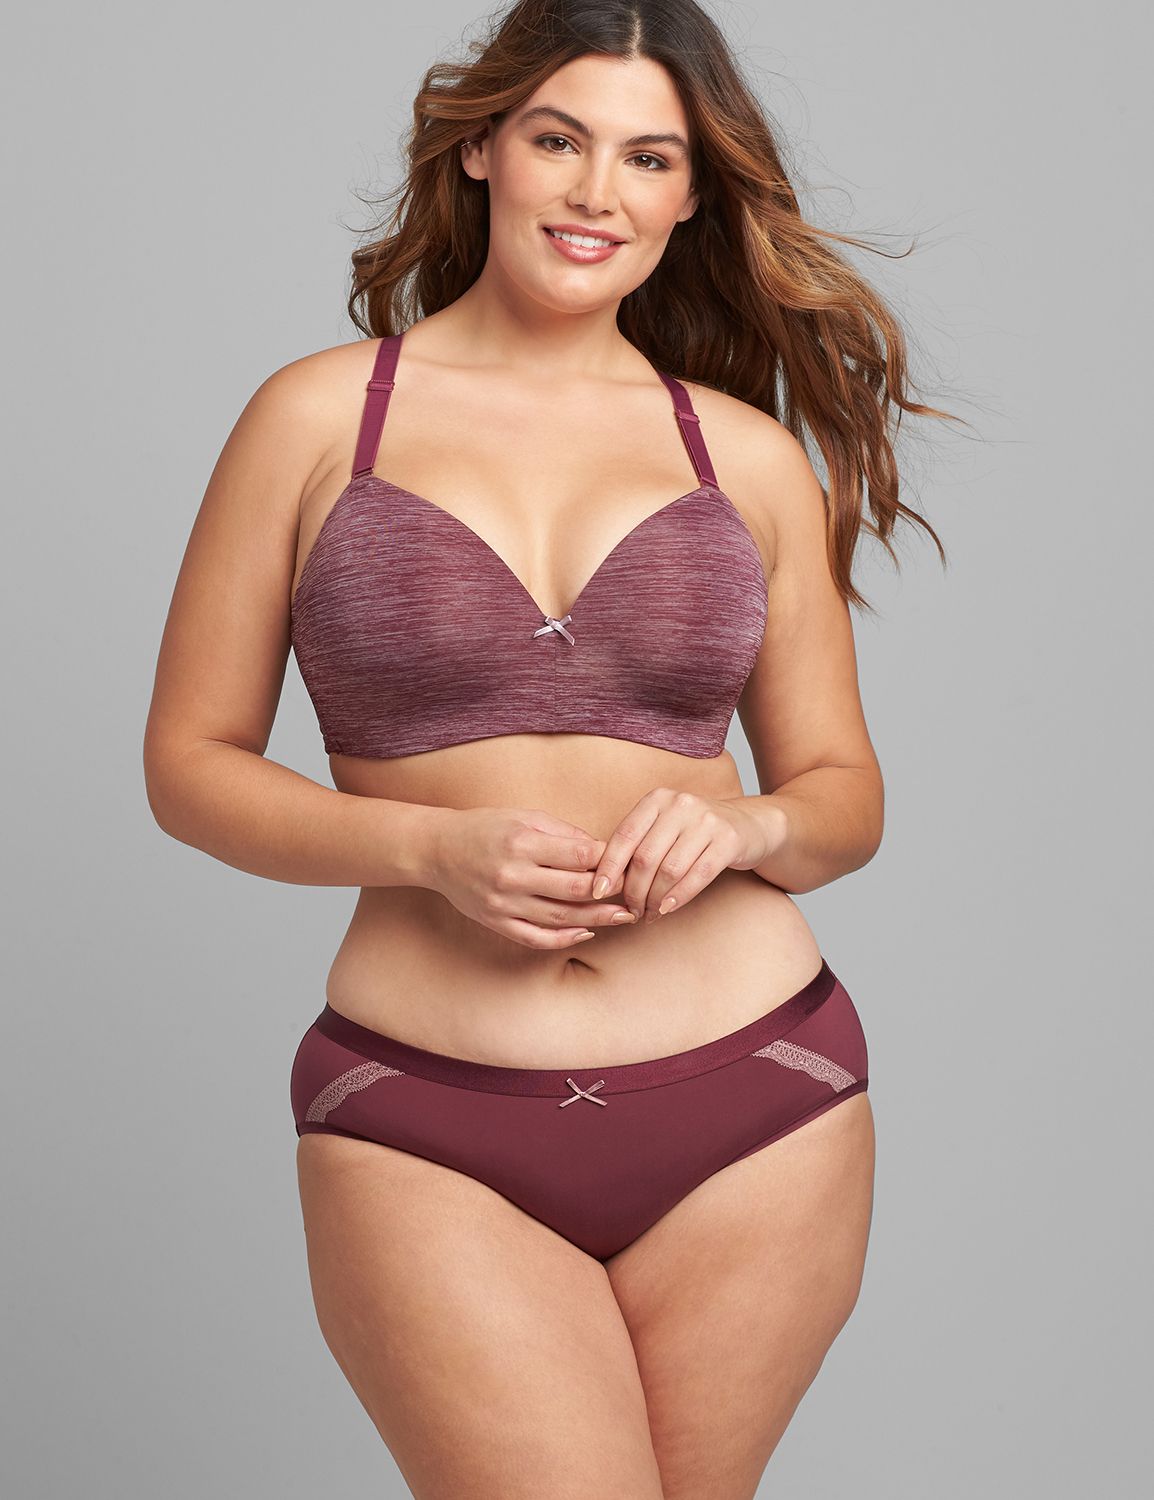 Lane Bryant - No wire? No problem. Simply Wire Free is a